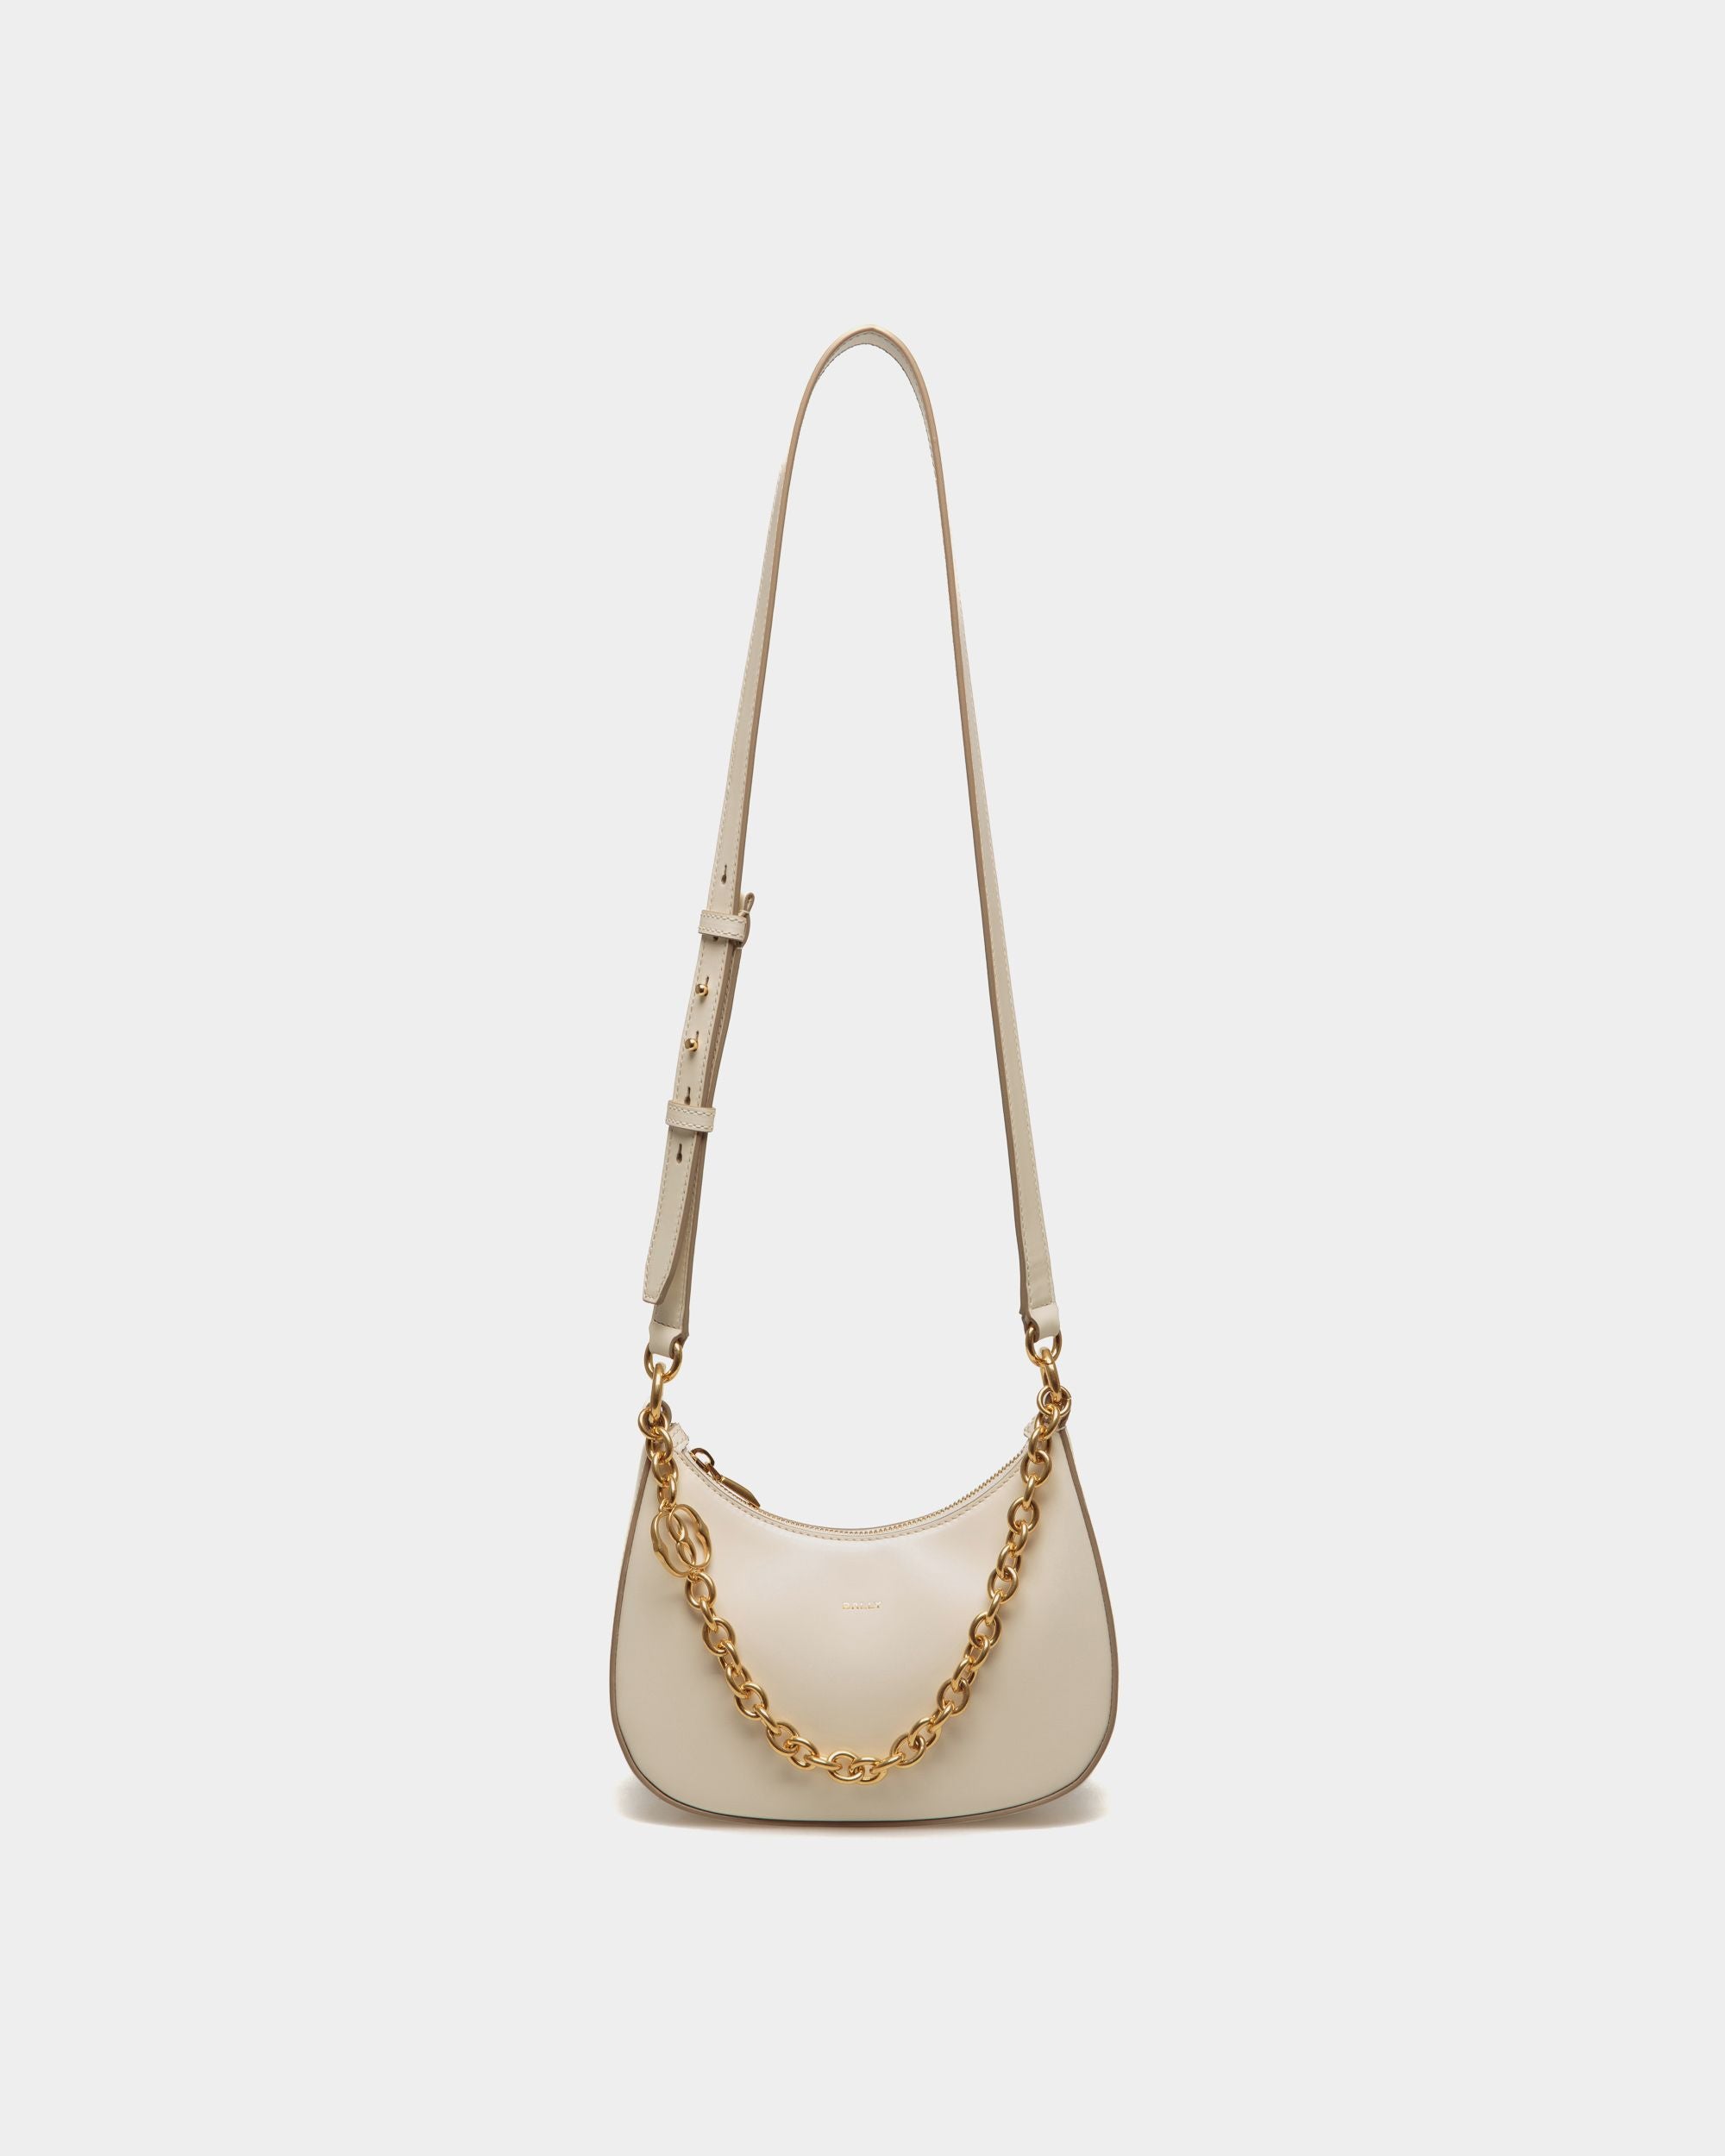 Emblem | Women's Mini Crossbody Bag in White Brushed Leather | Bally | Still Life Front